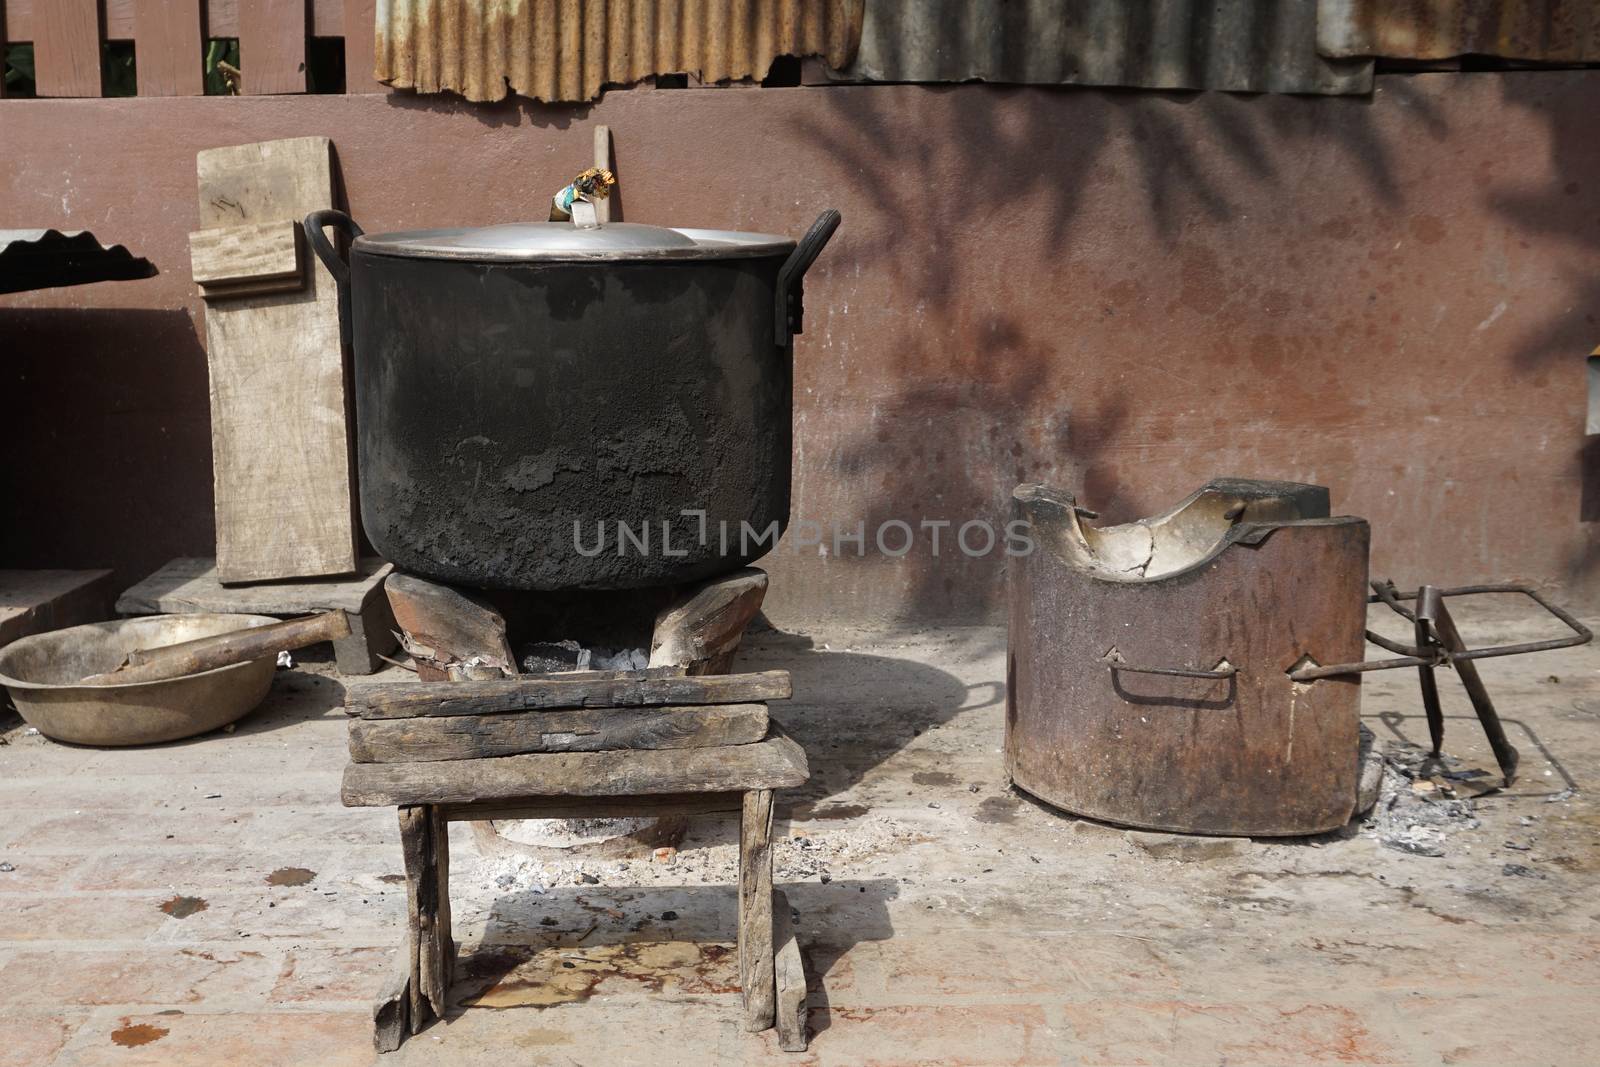 Local stove kitchen outdoor in Laos